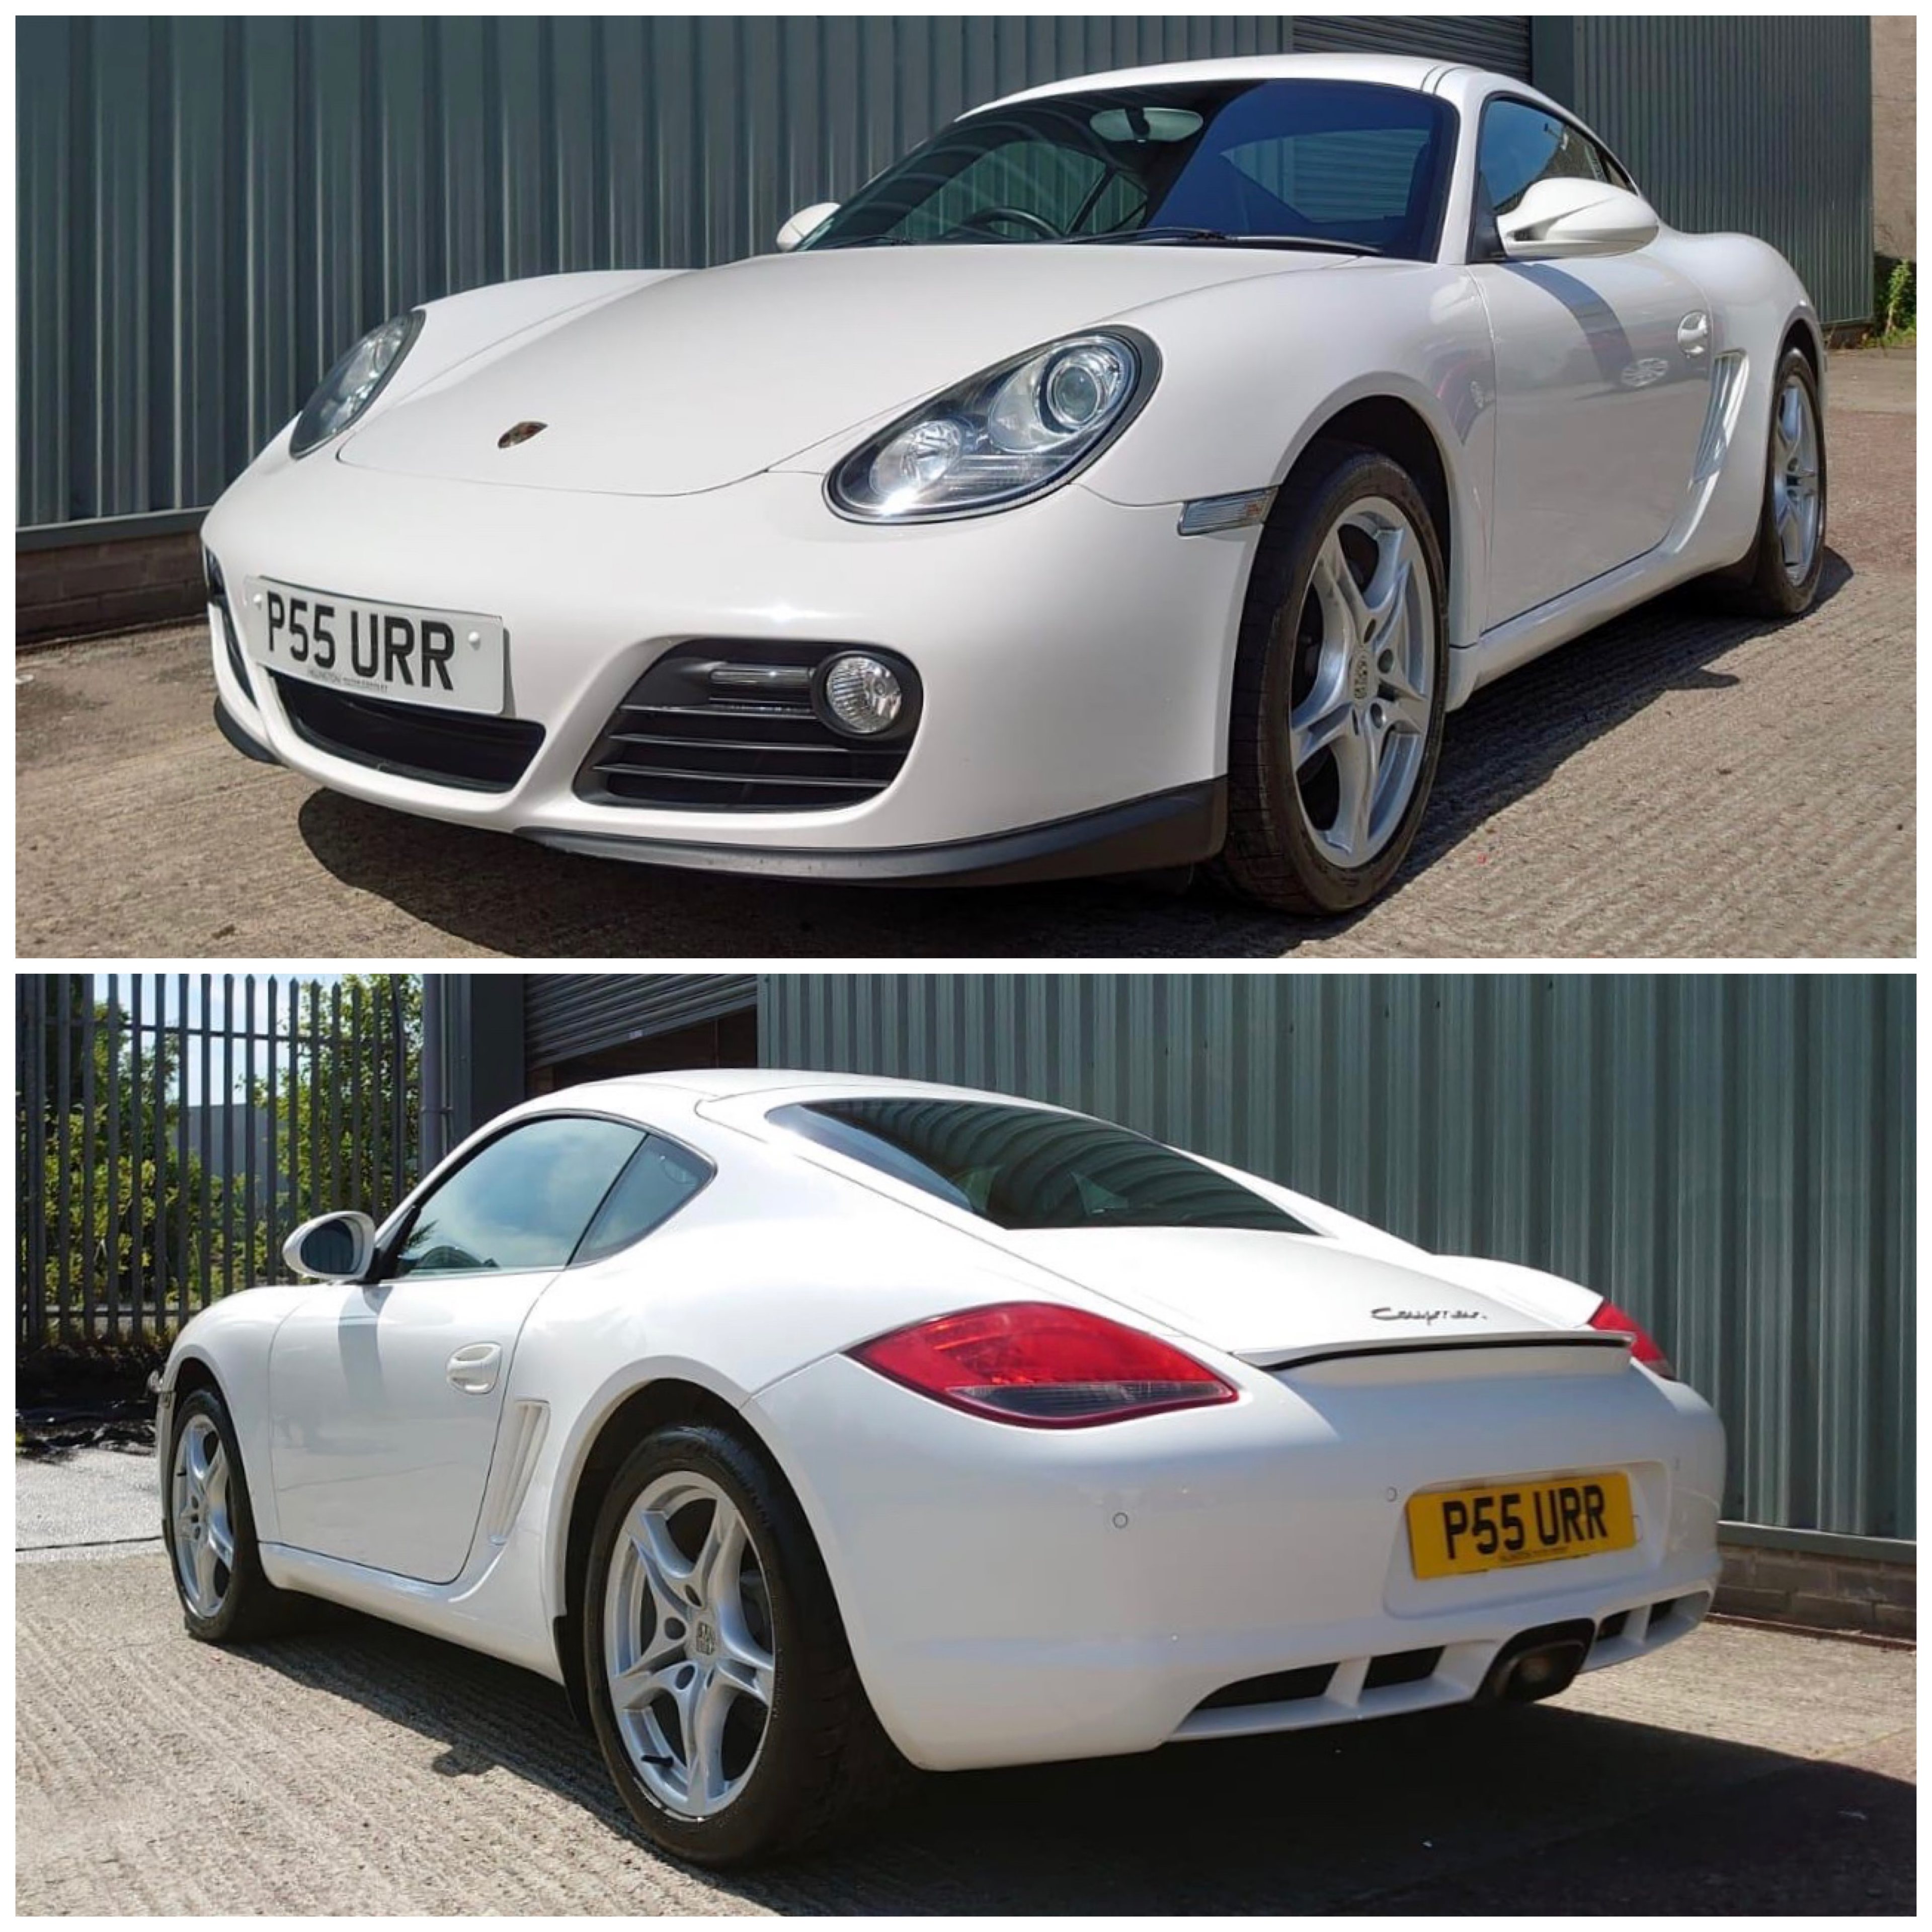 Boxster / Cayman Spotted out and about - Page 3 - Boxster/Cayman - PistonHeads